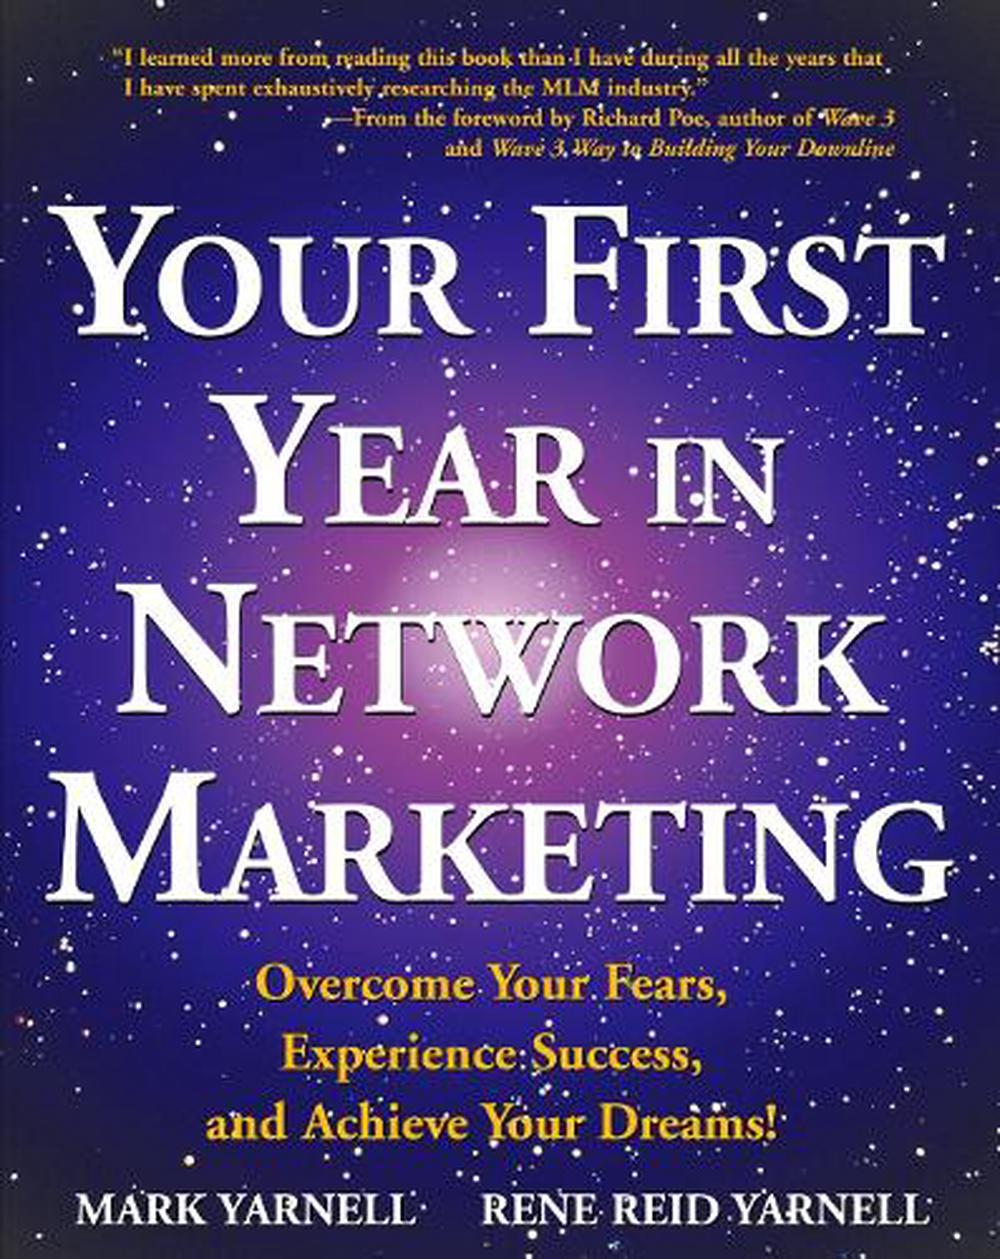 Your First Year in Network Marketing : Overcome Your Fears, Experience Success, and Achieve Your Dreams! (Paperback) - image 1 of 1